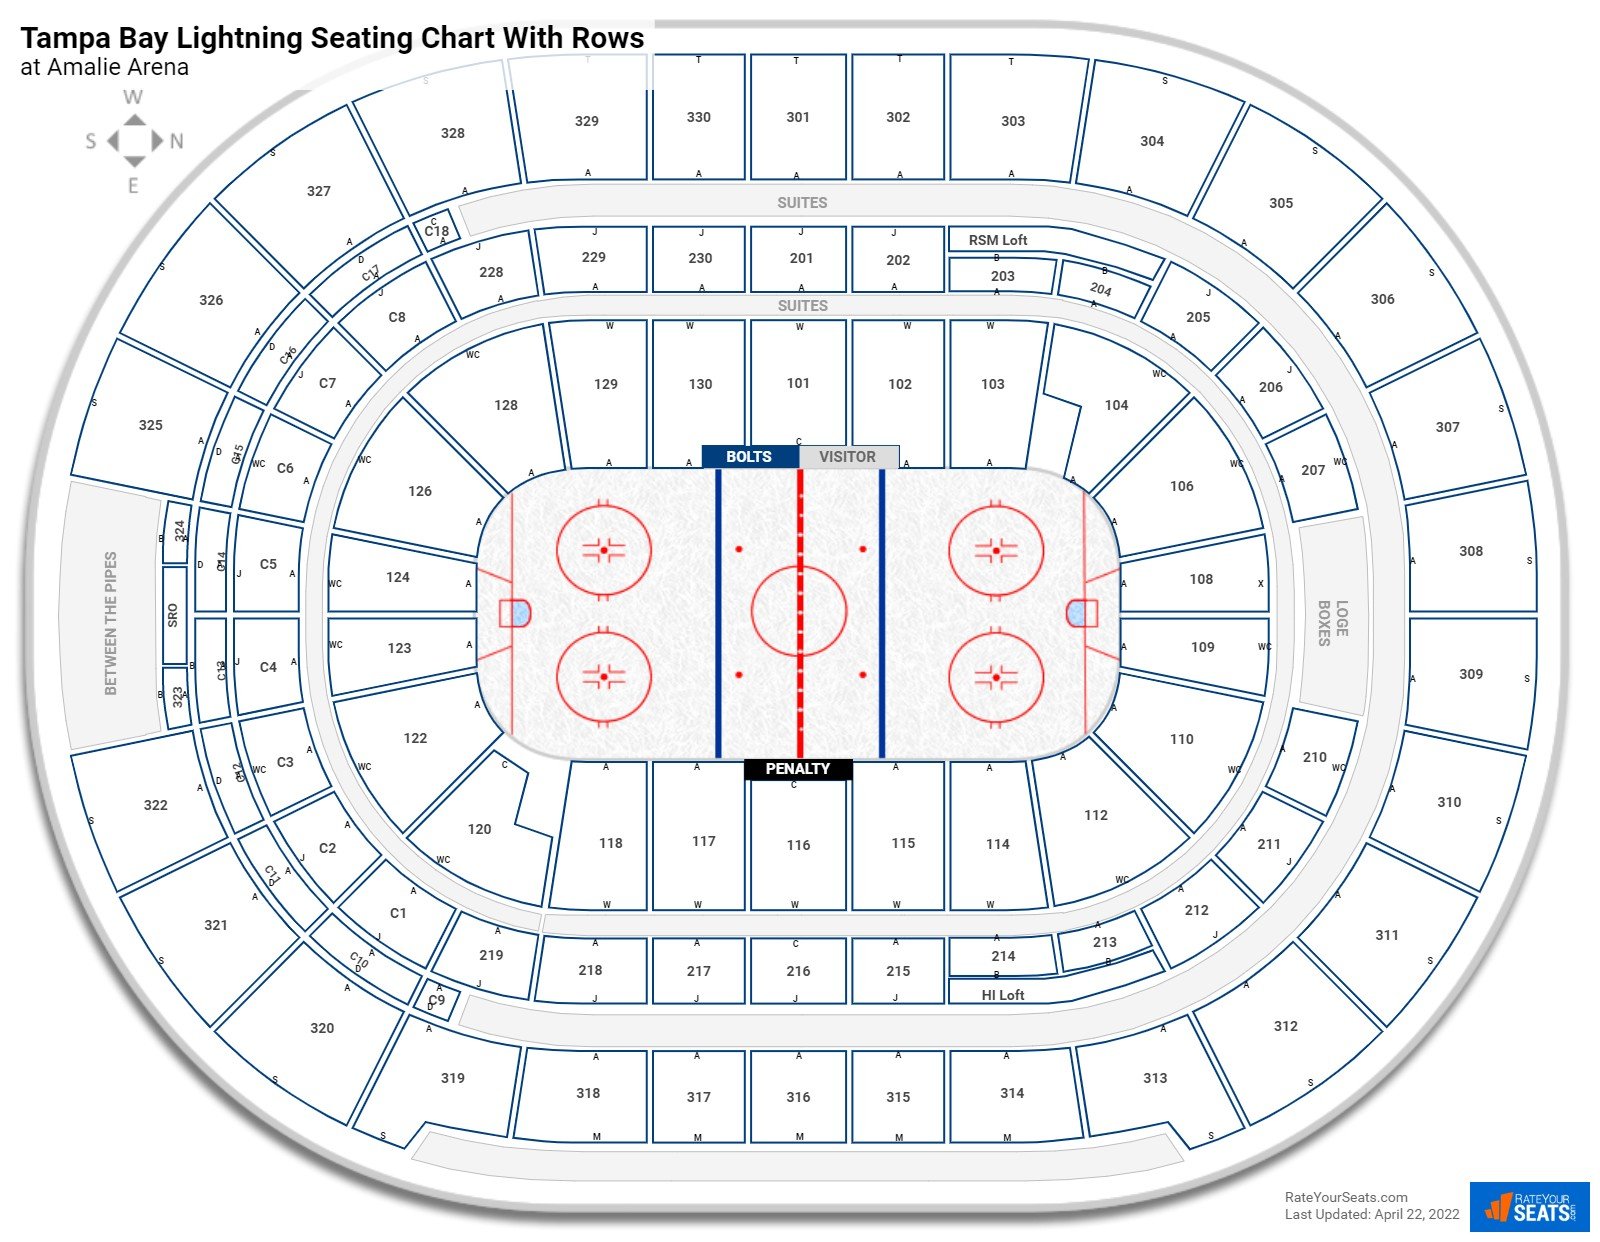 Amalie Arena seating chart with row numbers